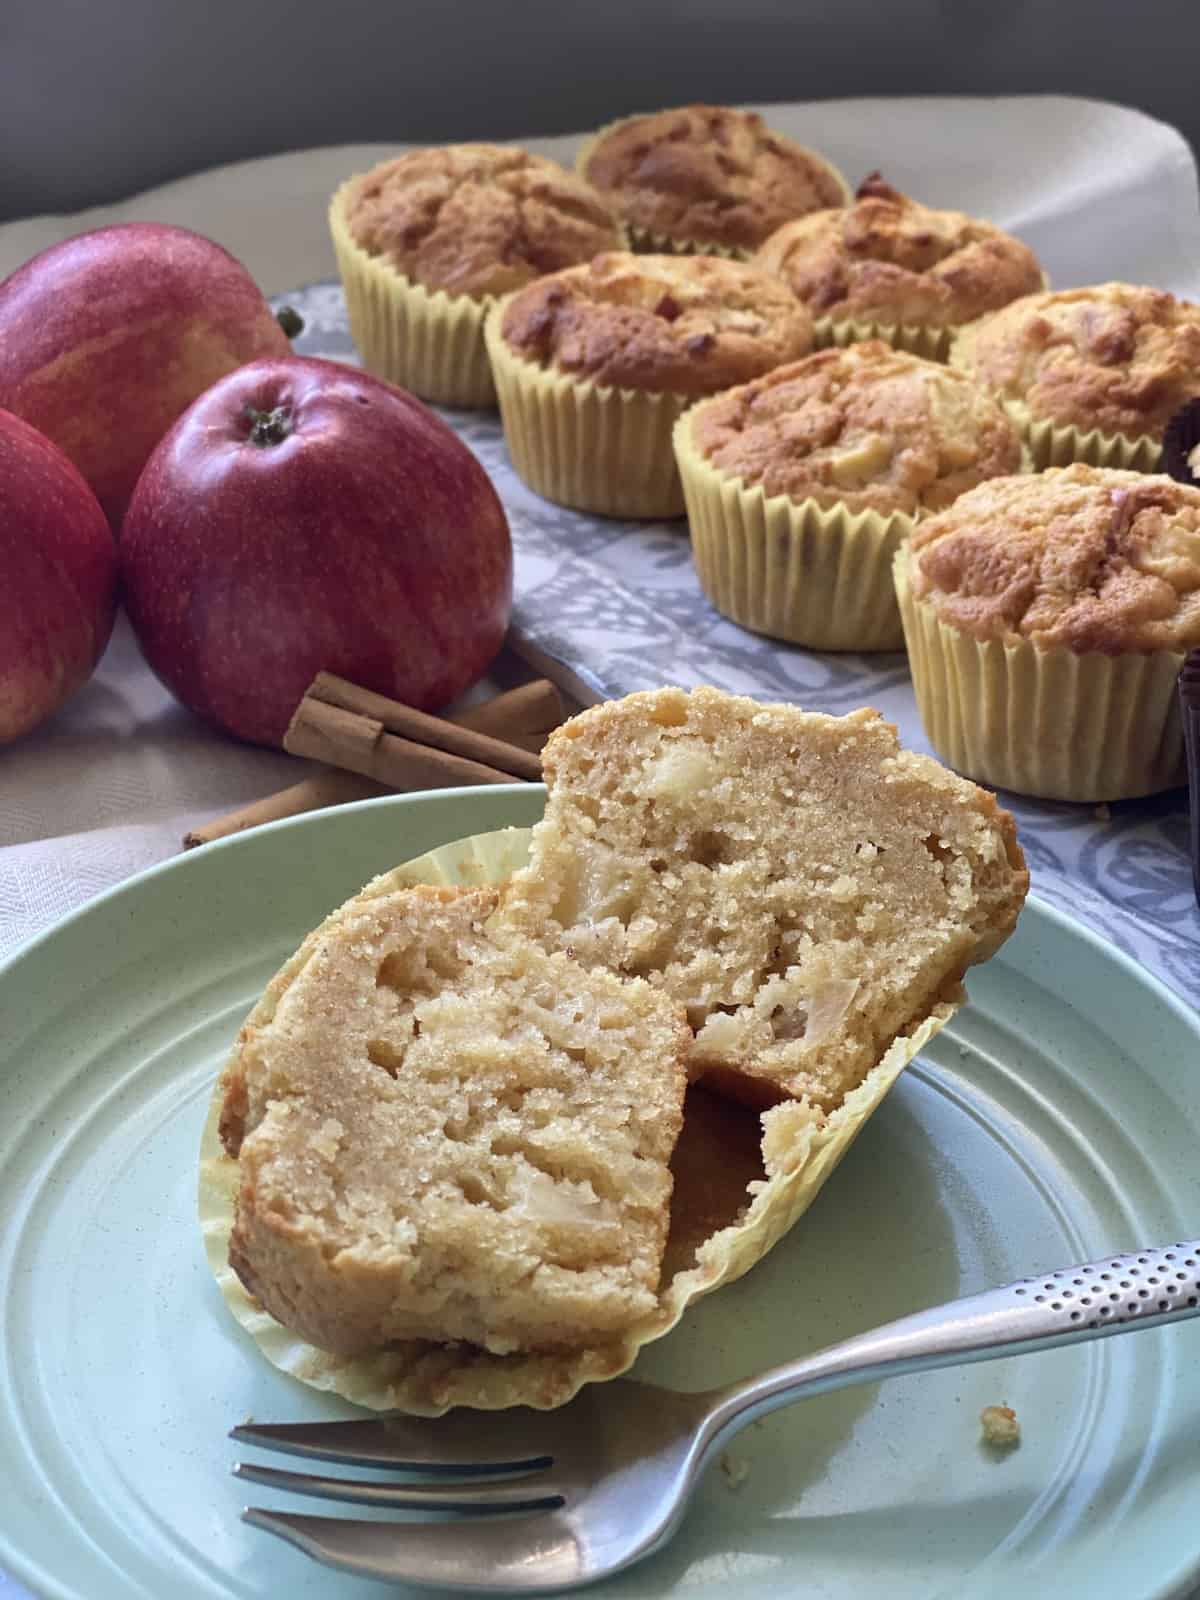 Sliced Apple and Cinnamon Muffin on a plate.